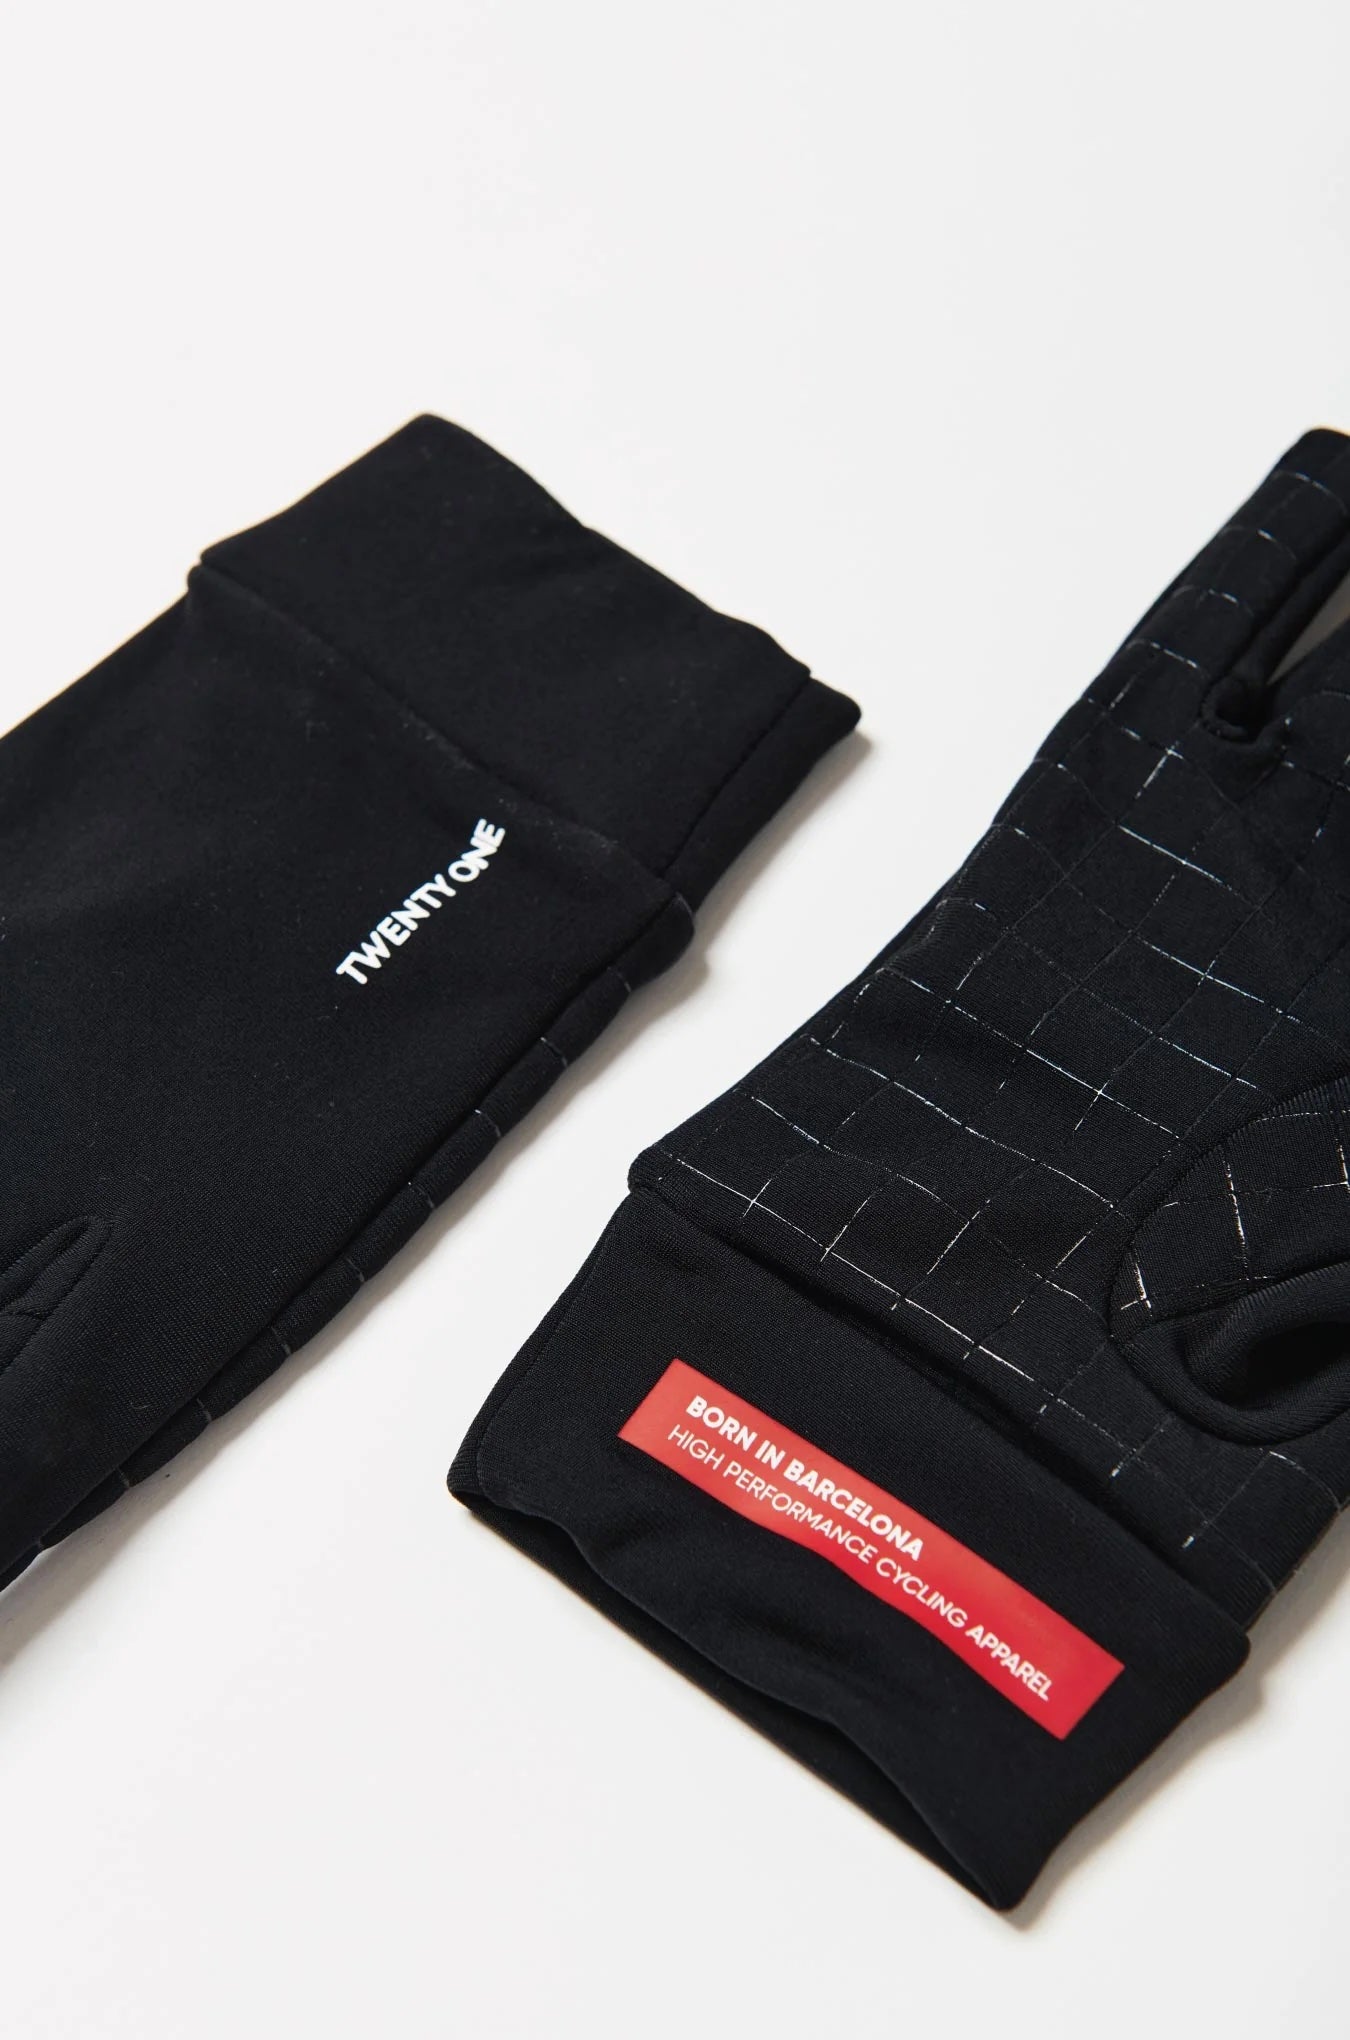 Factory Thermal Gloves